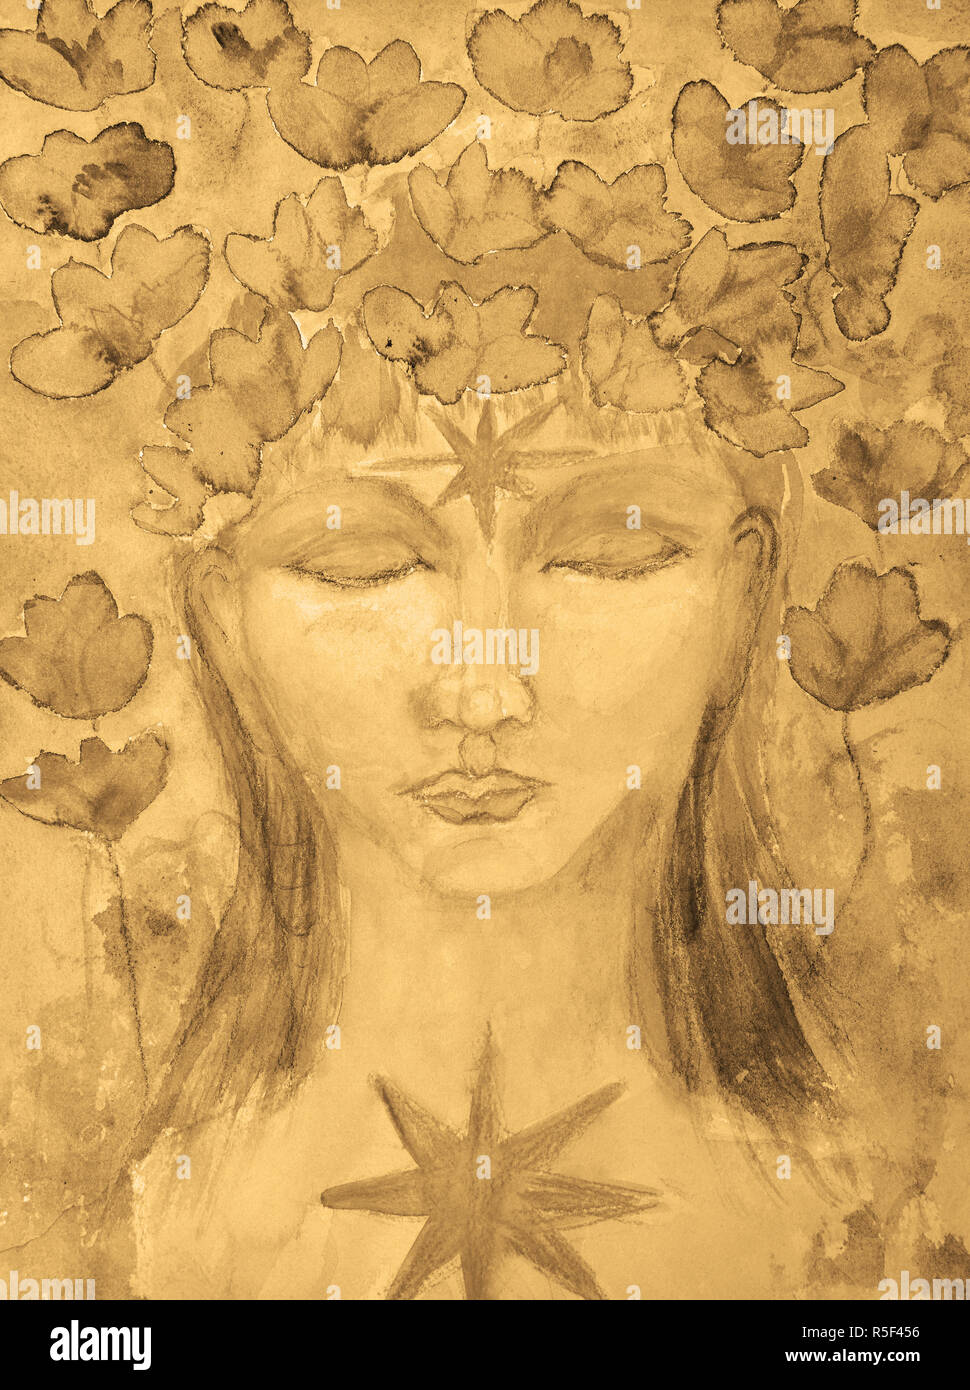 Female buddha with lotus flowers in sepia tones. The dabbing technique near the edges gives a soft focus effect due to the altered surface roughness o Stock Photo